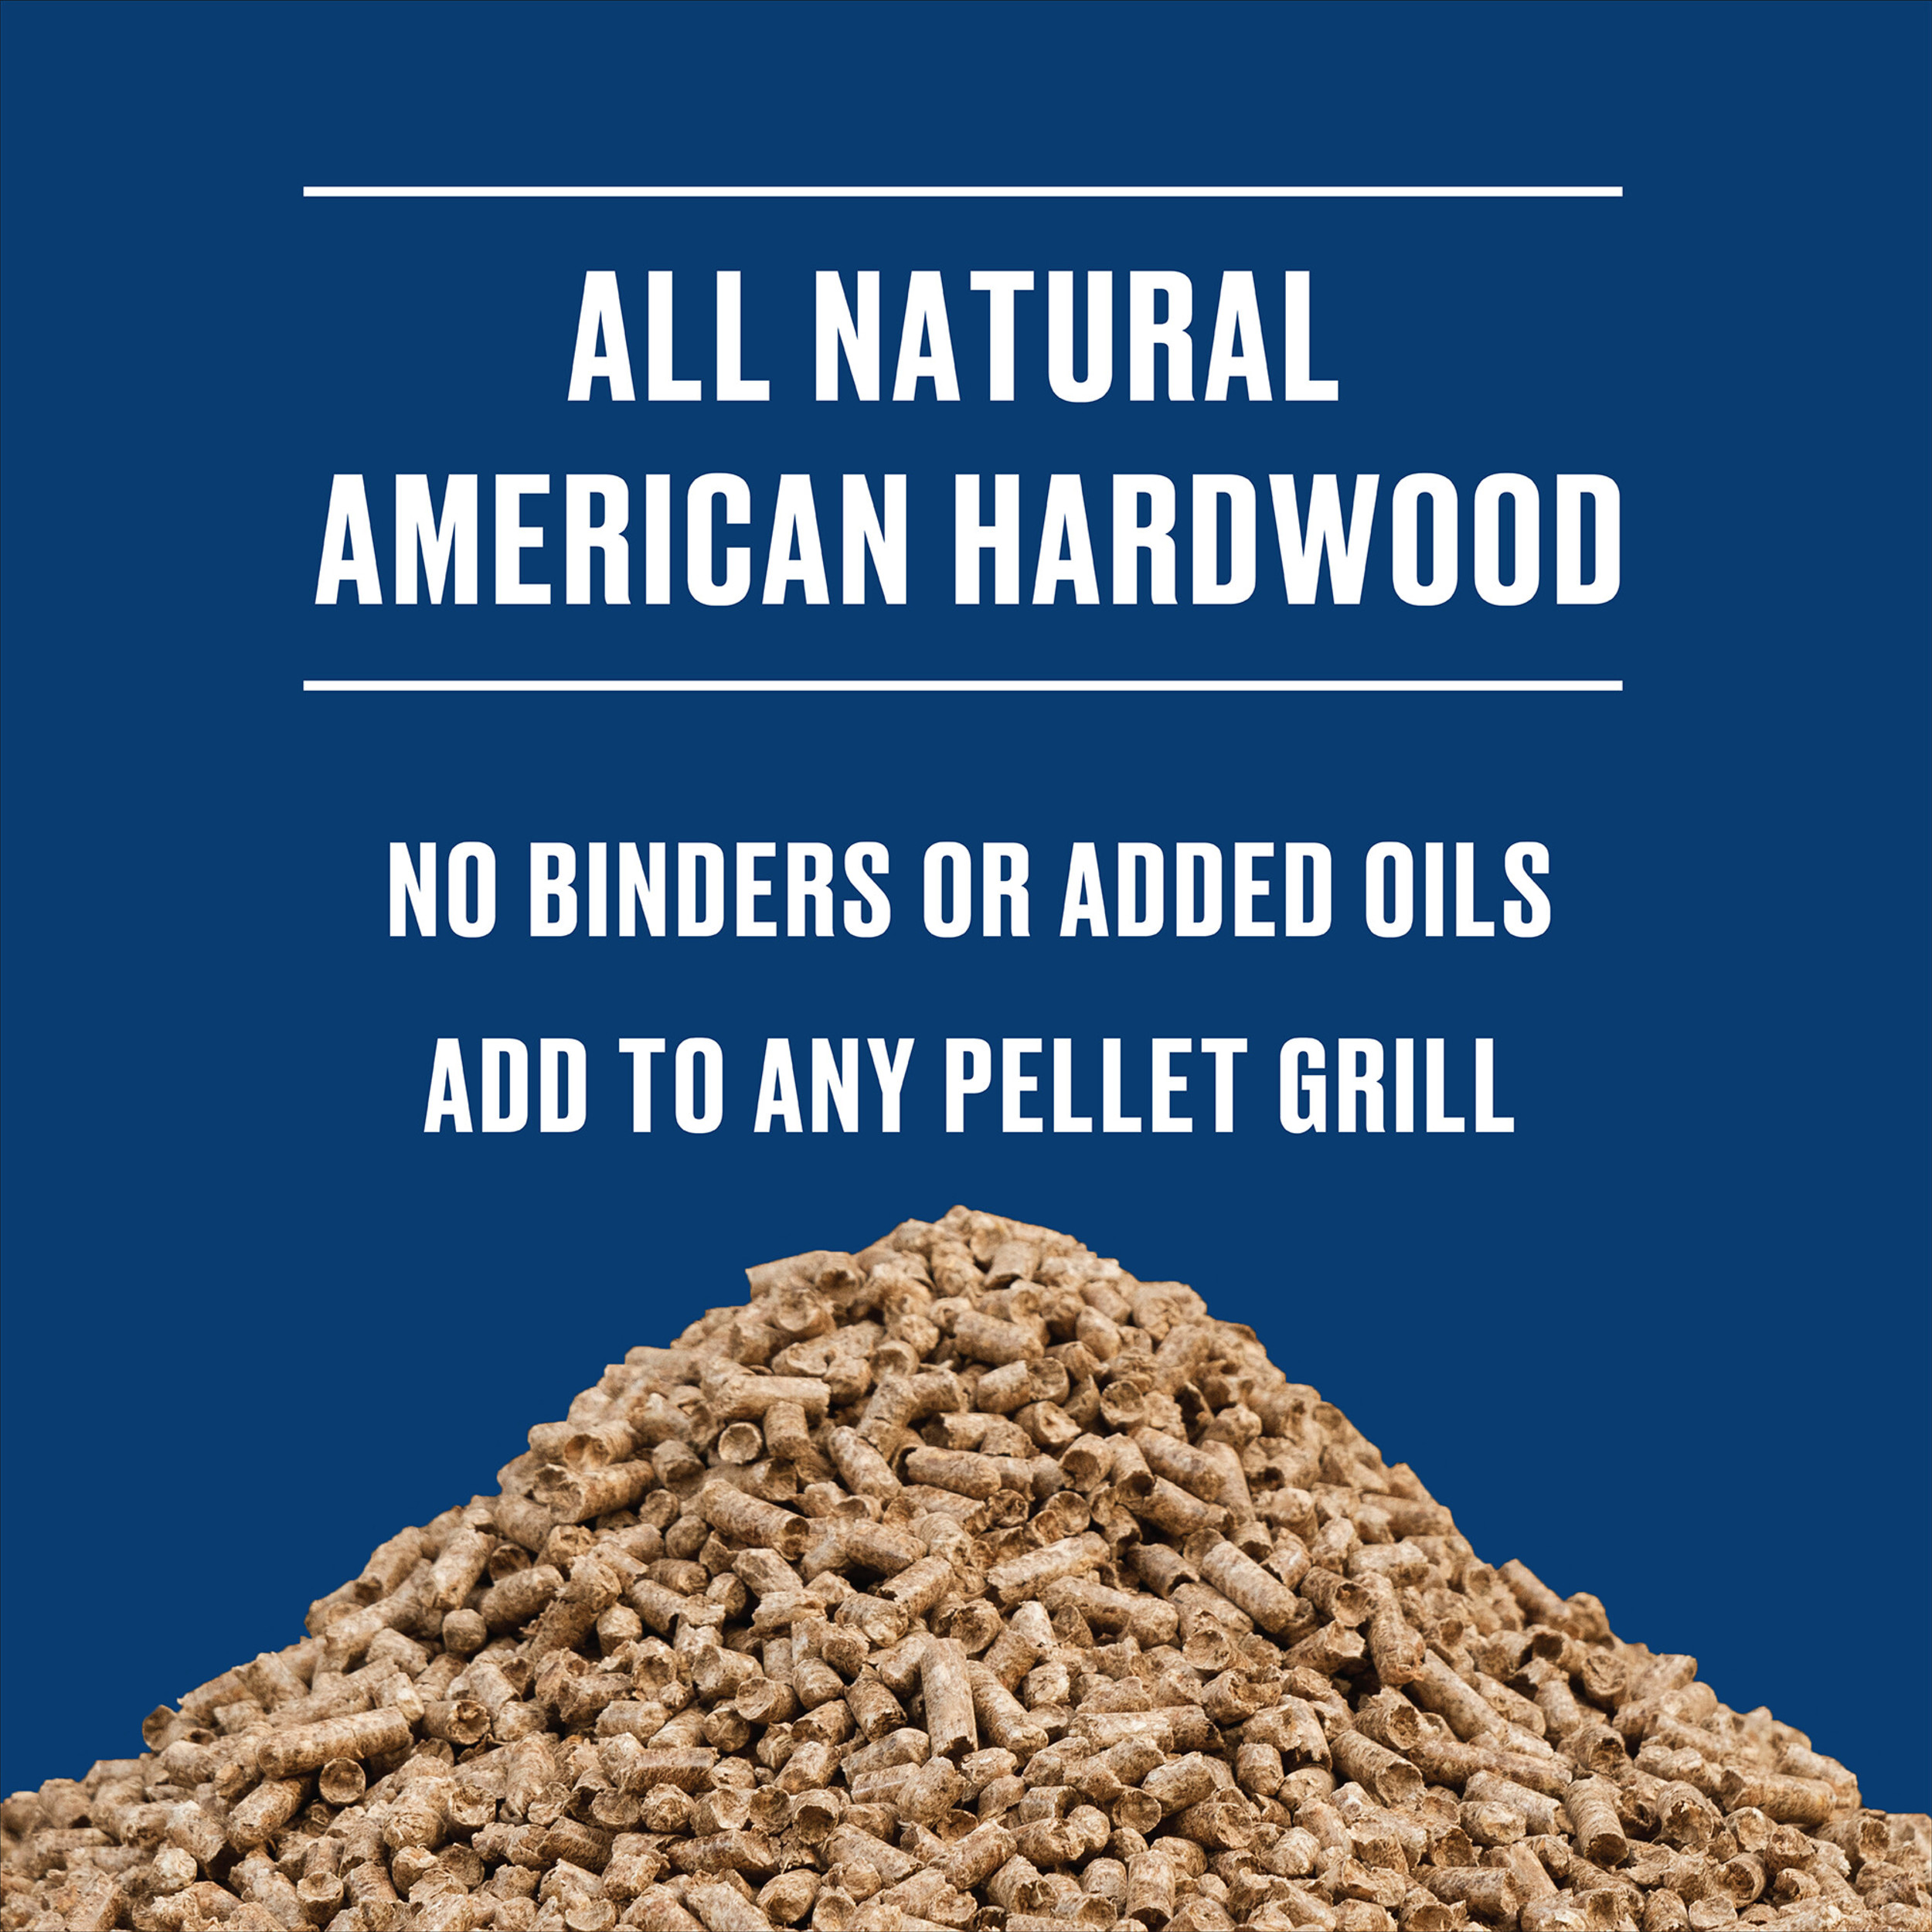 Kingsford 100% Hickory Wood Pellets, BBQ Pellets for Grilling, 20 Pounds - image 5 of 8